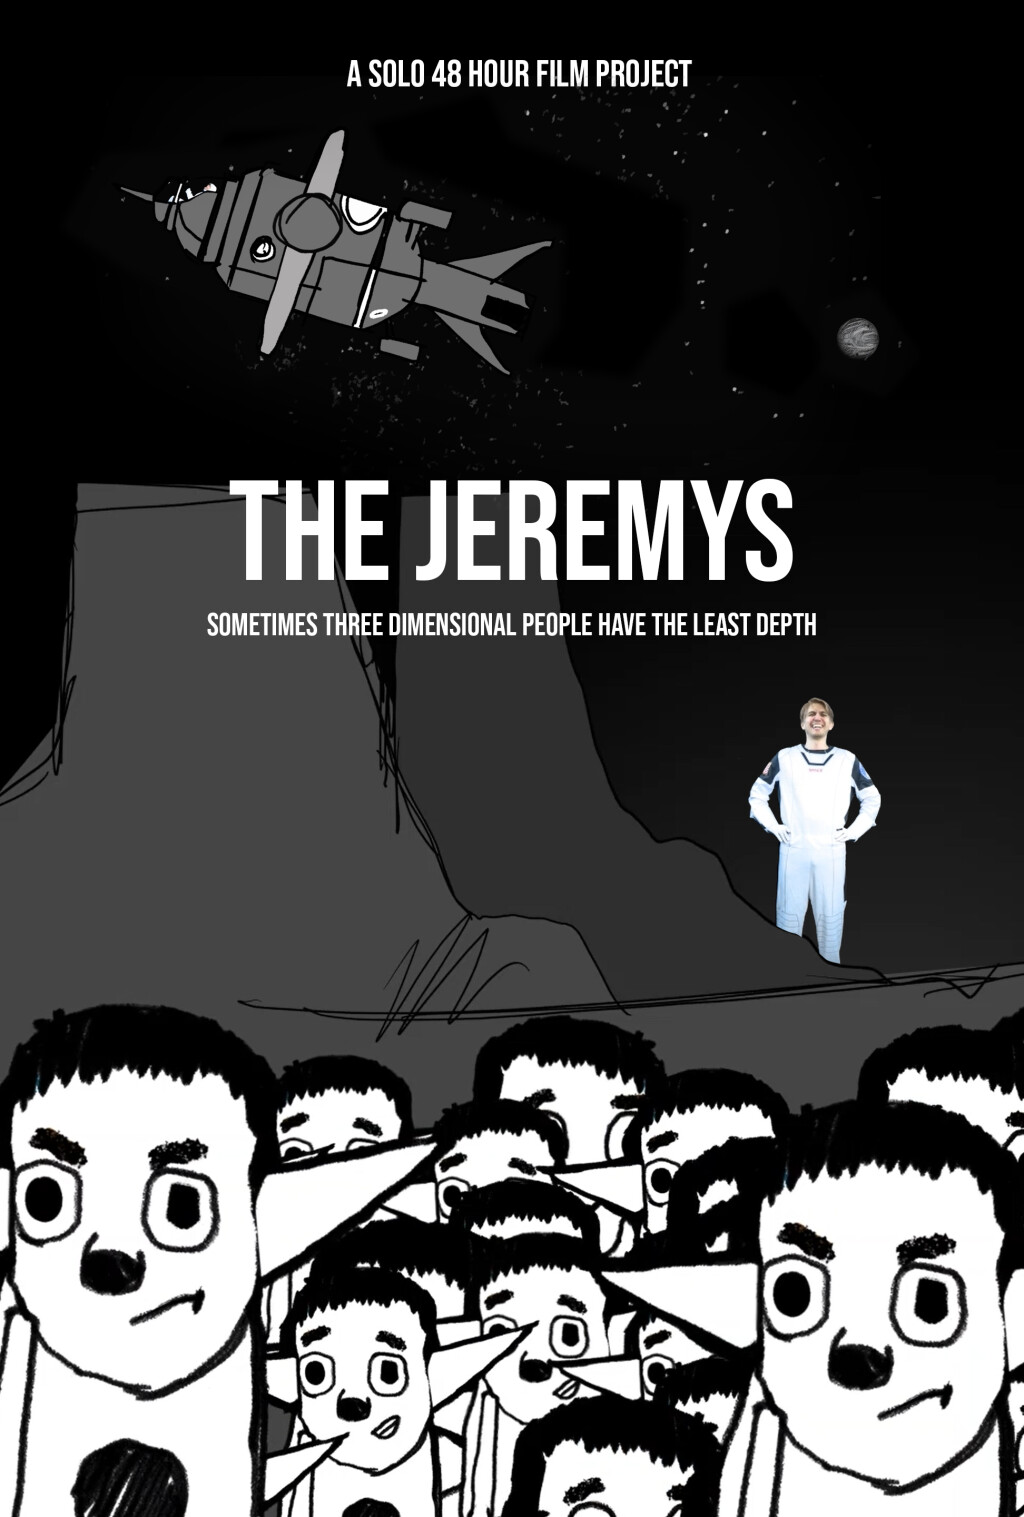 Filmposter for The Jeremys